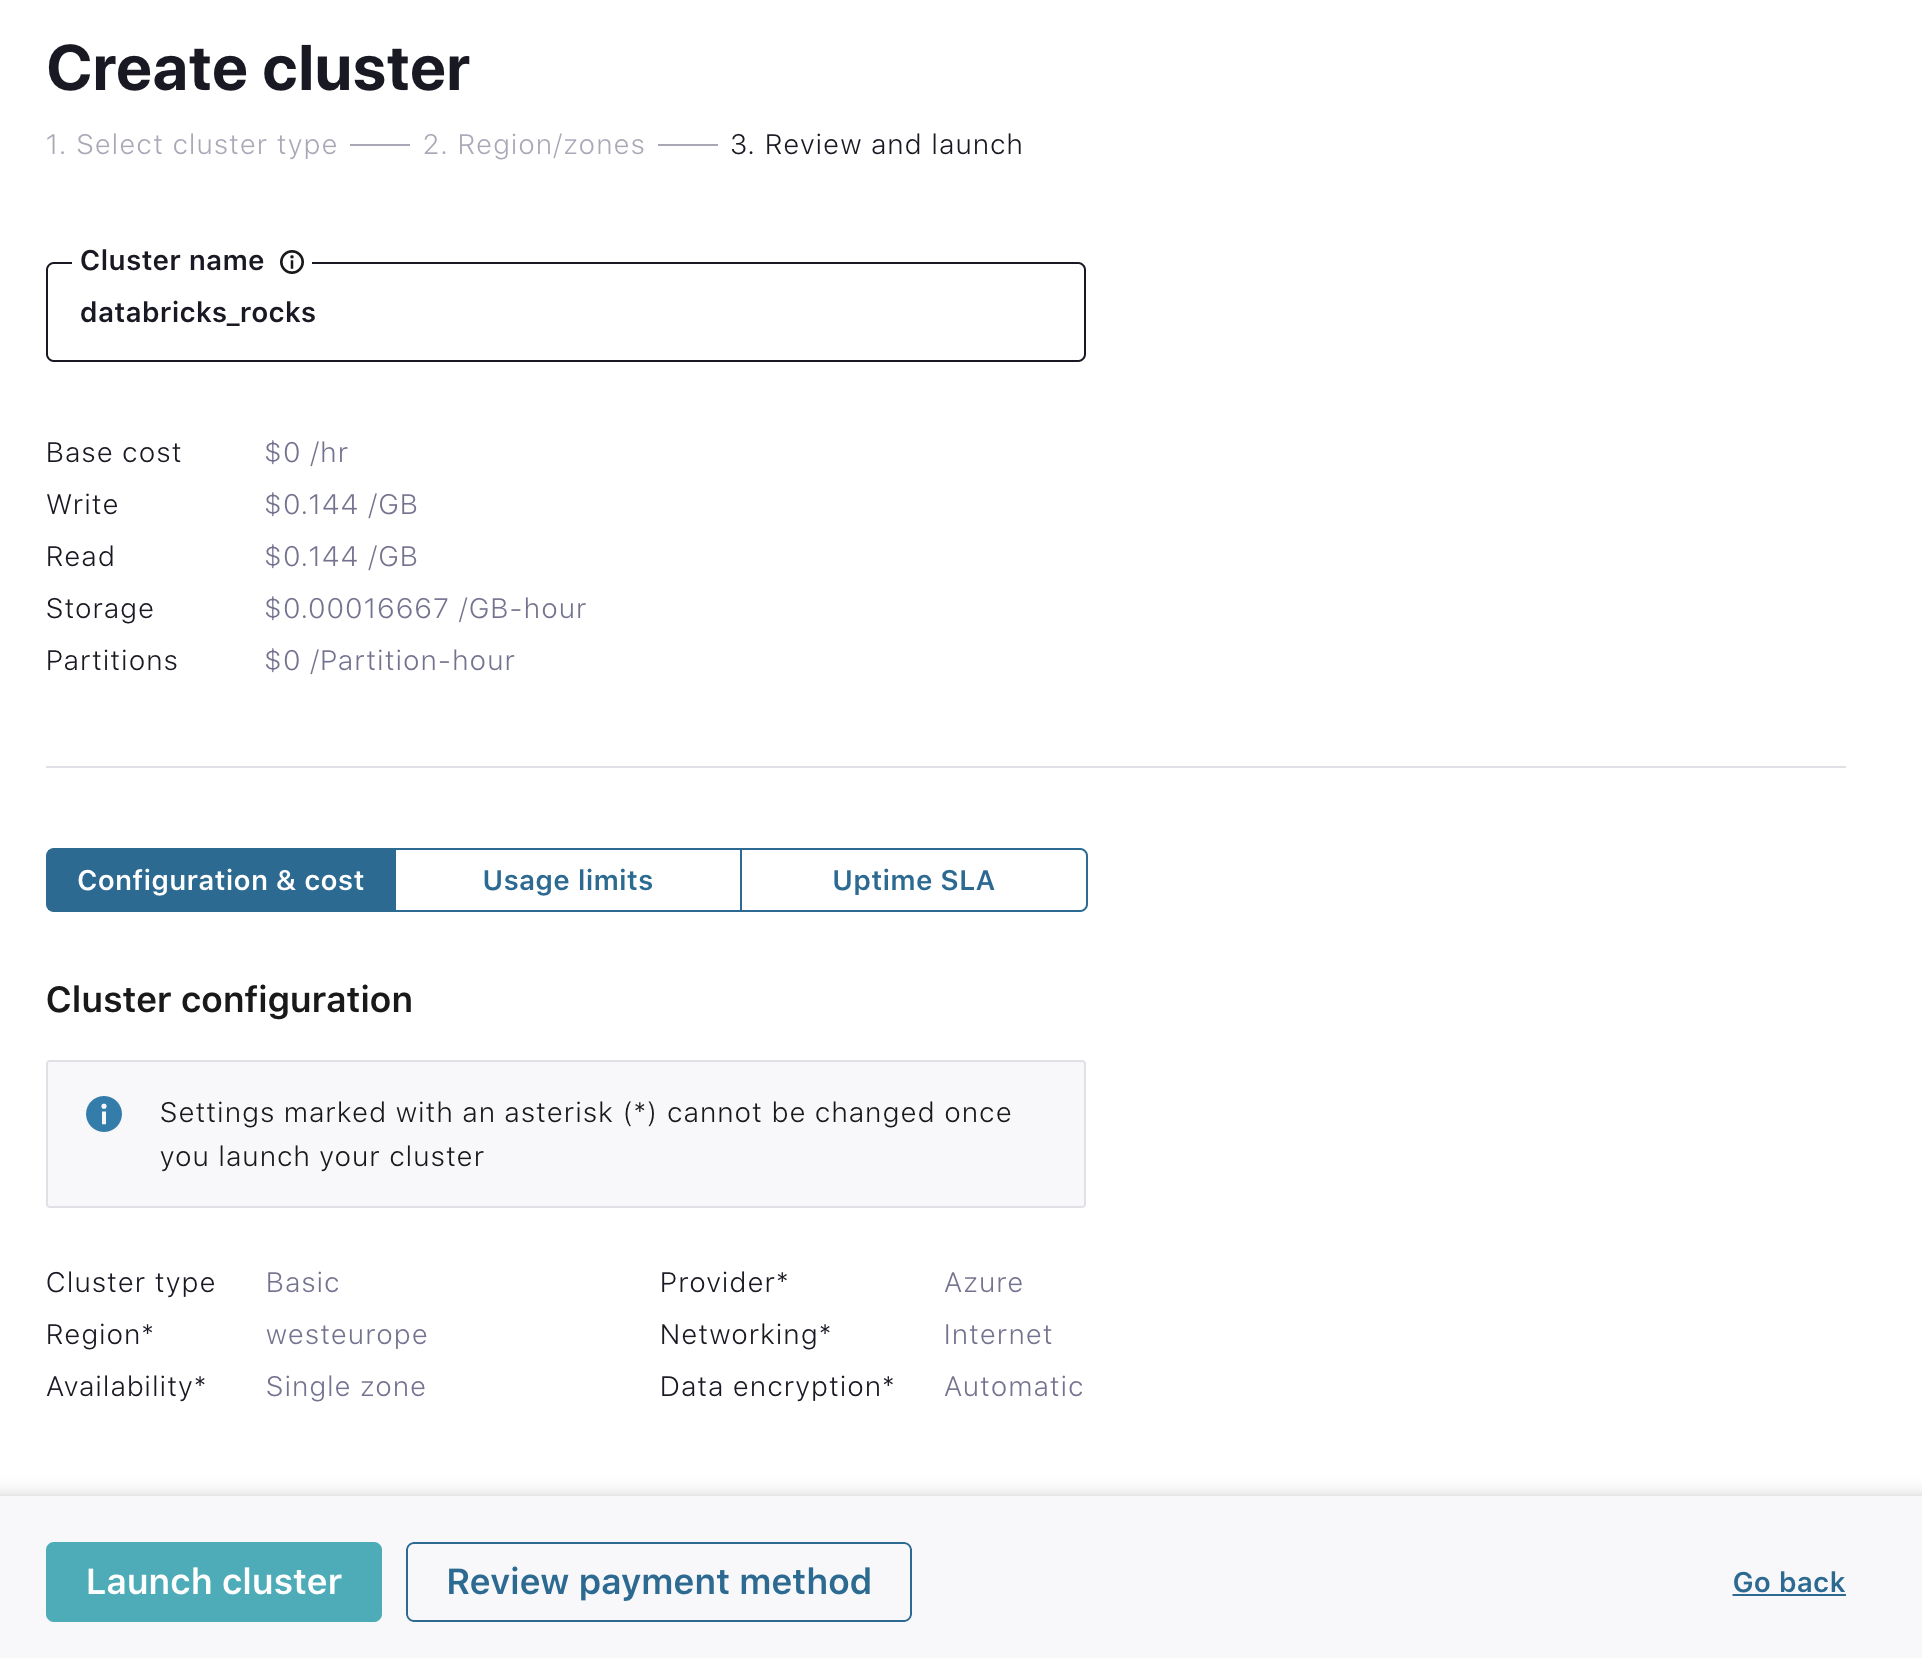 Review and launch cluster